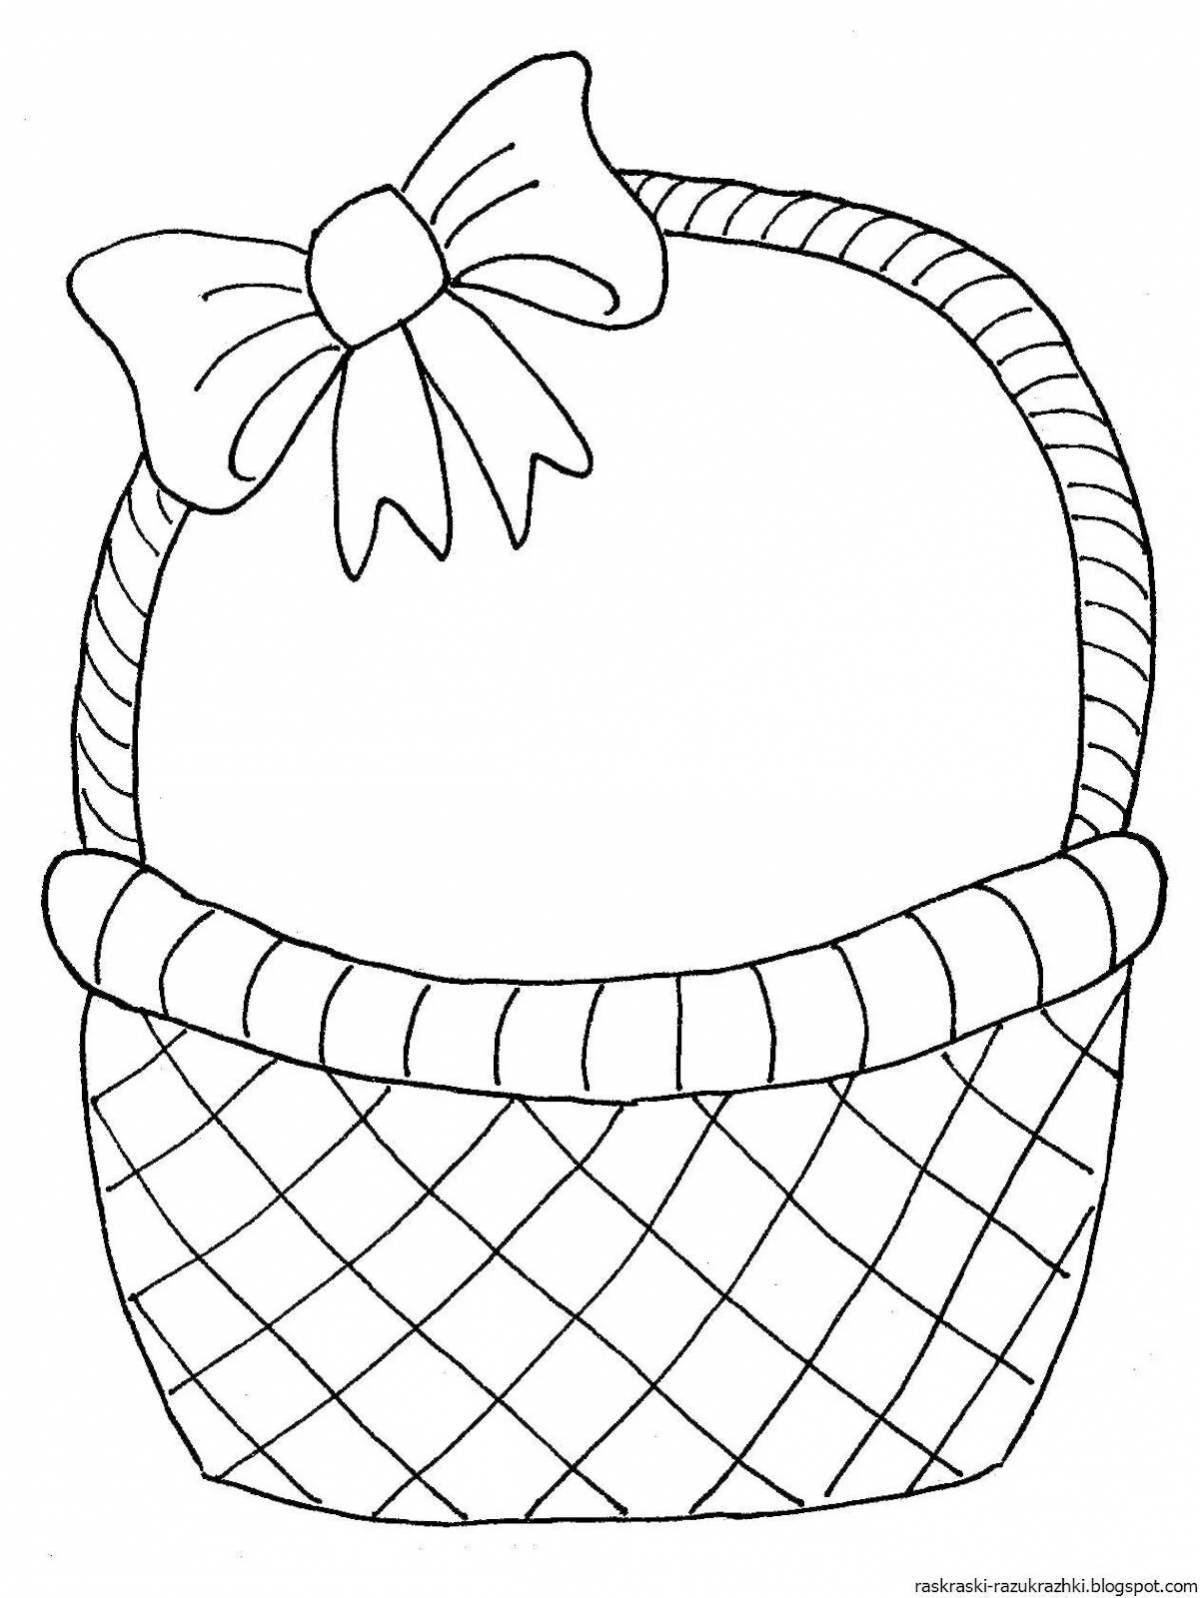 Colored empty basket coloring book for kids